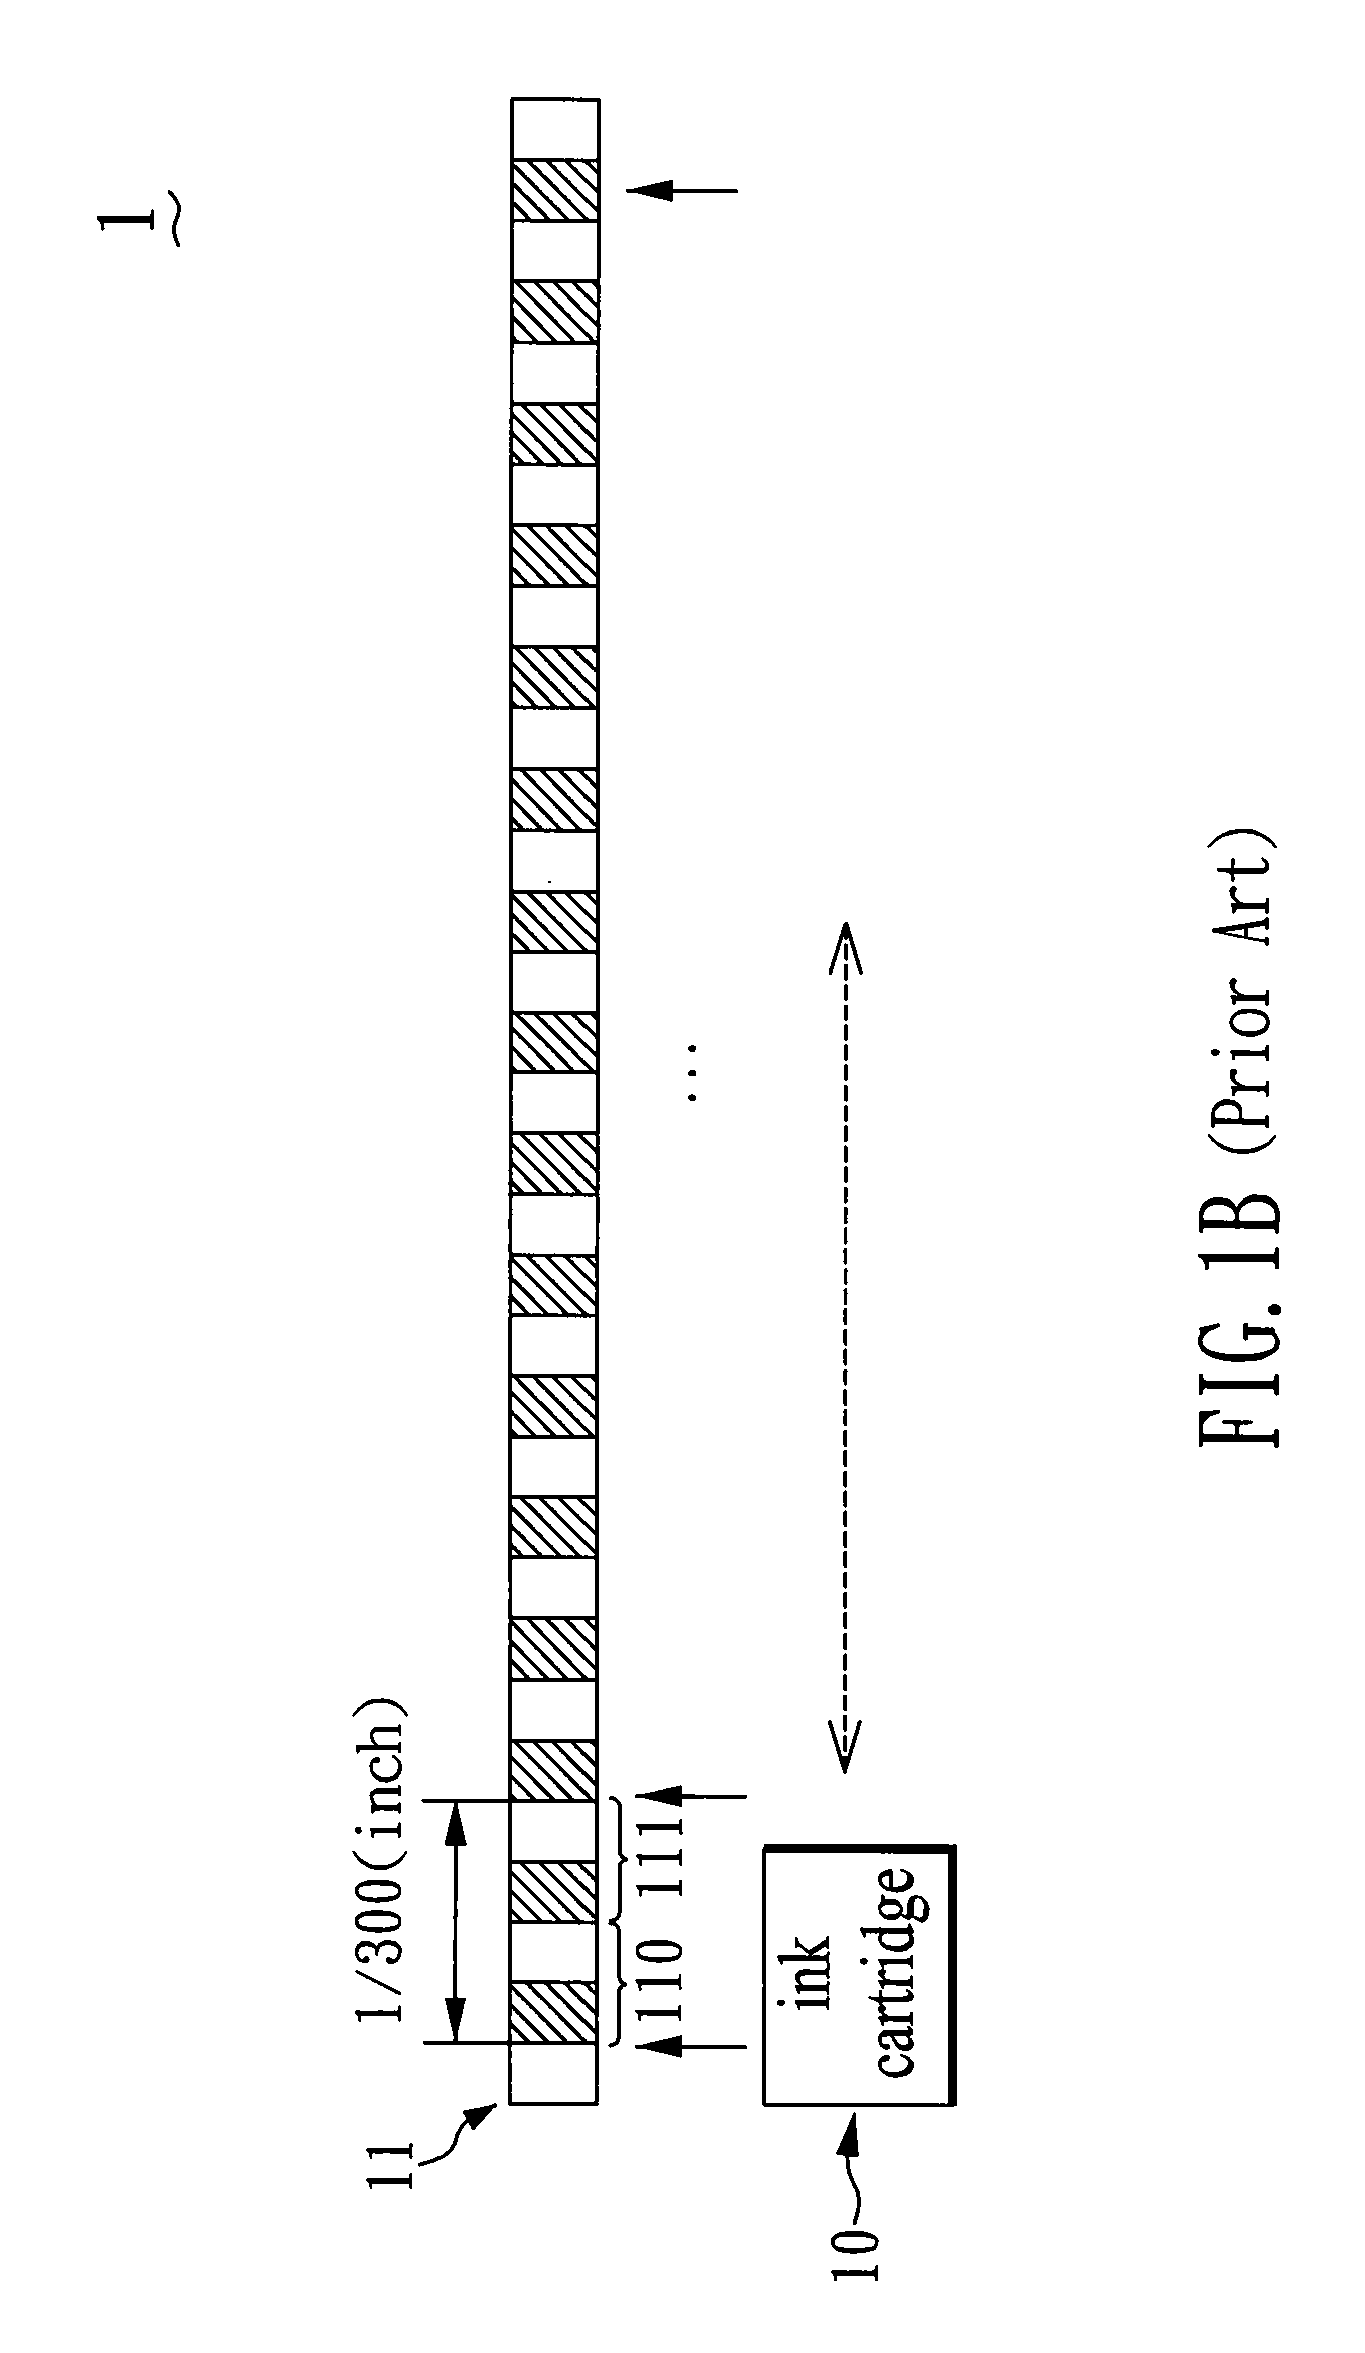 High-speed page wide multiple-pass printing method and a printing device adaptive to the high-speed page wide multiple-pass printing method